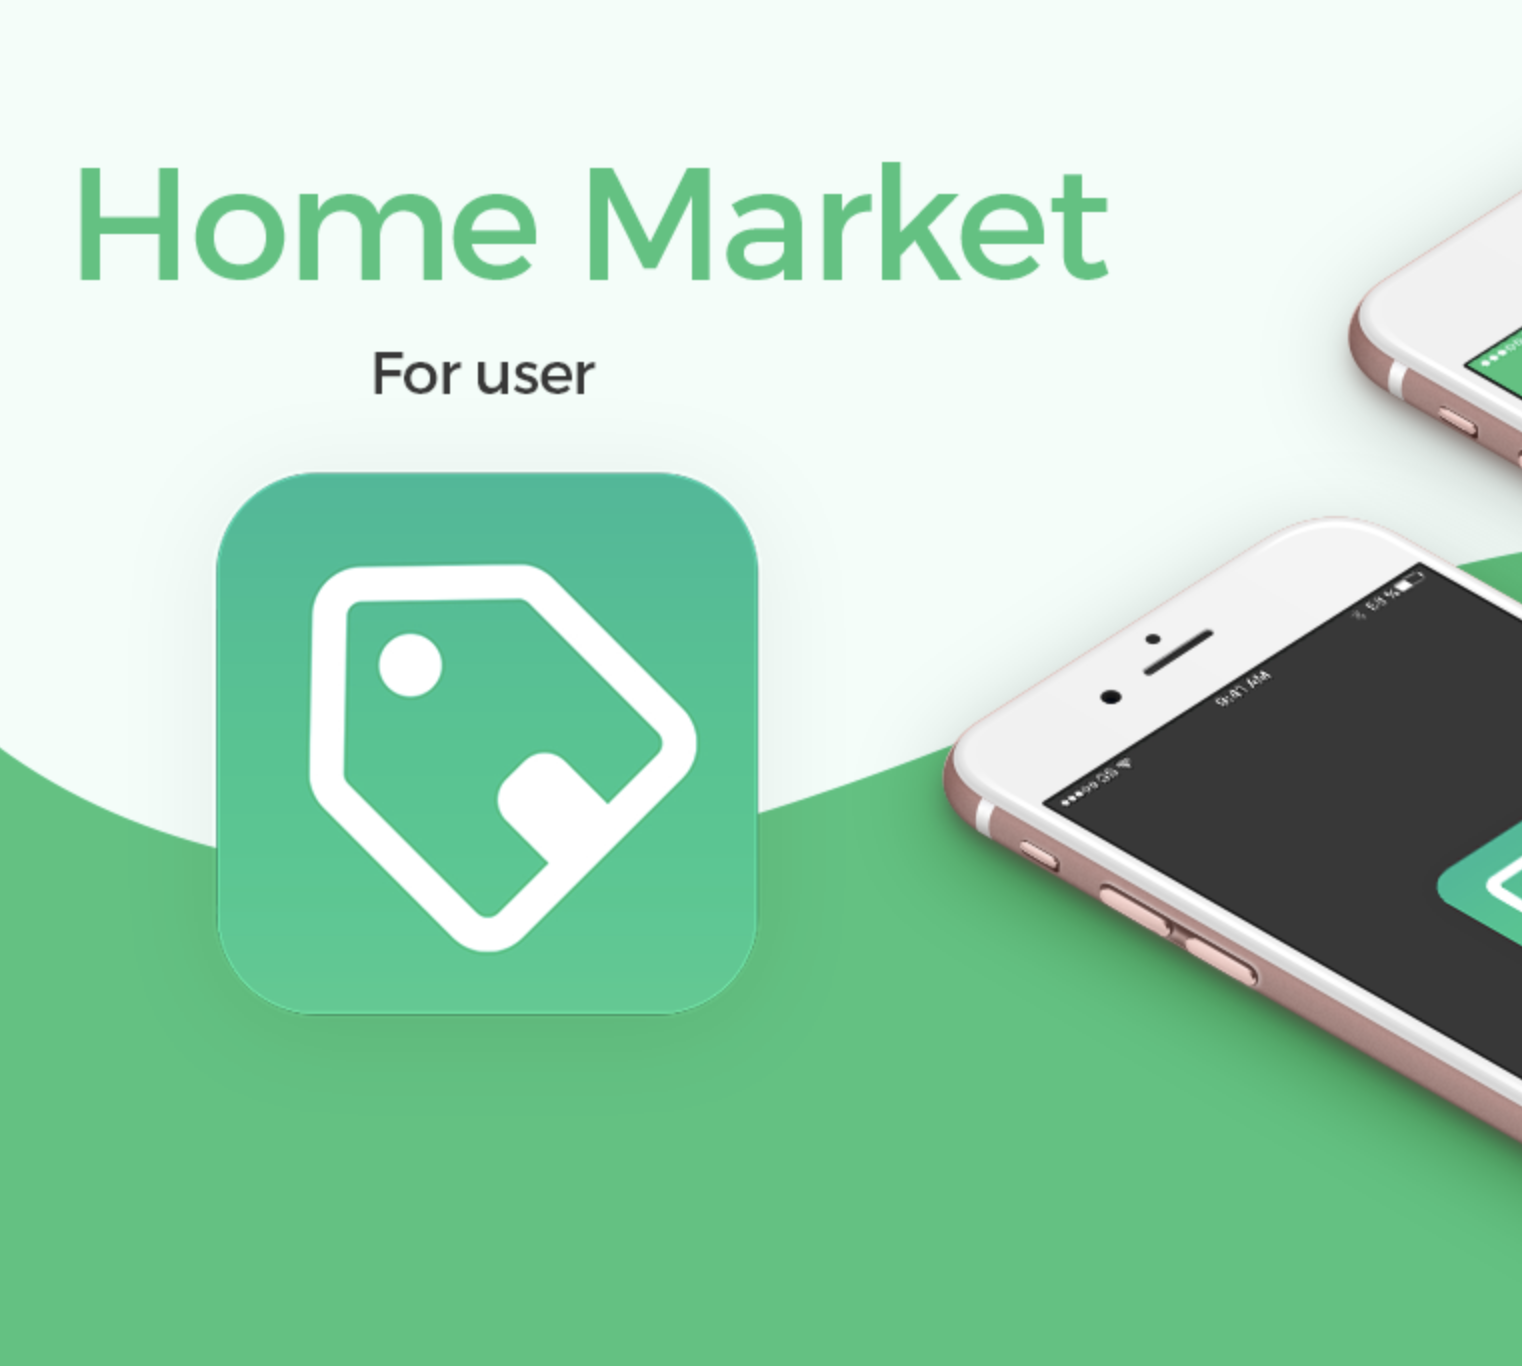 A mobile application that lets customers view homemade treats and products.